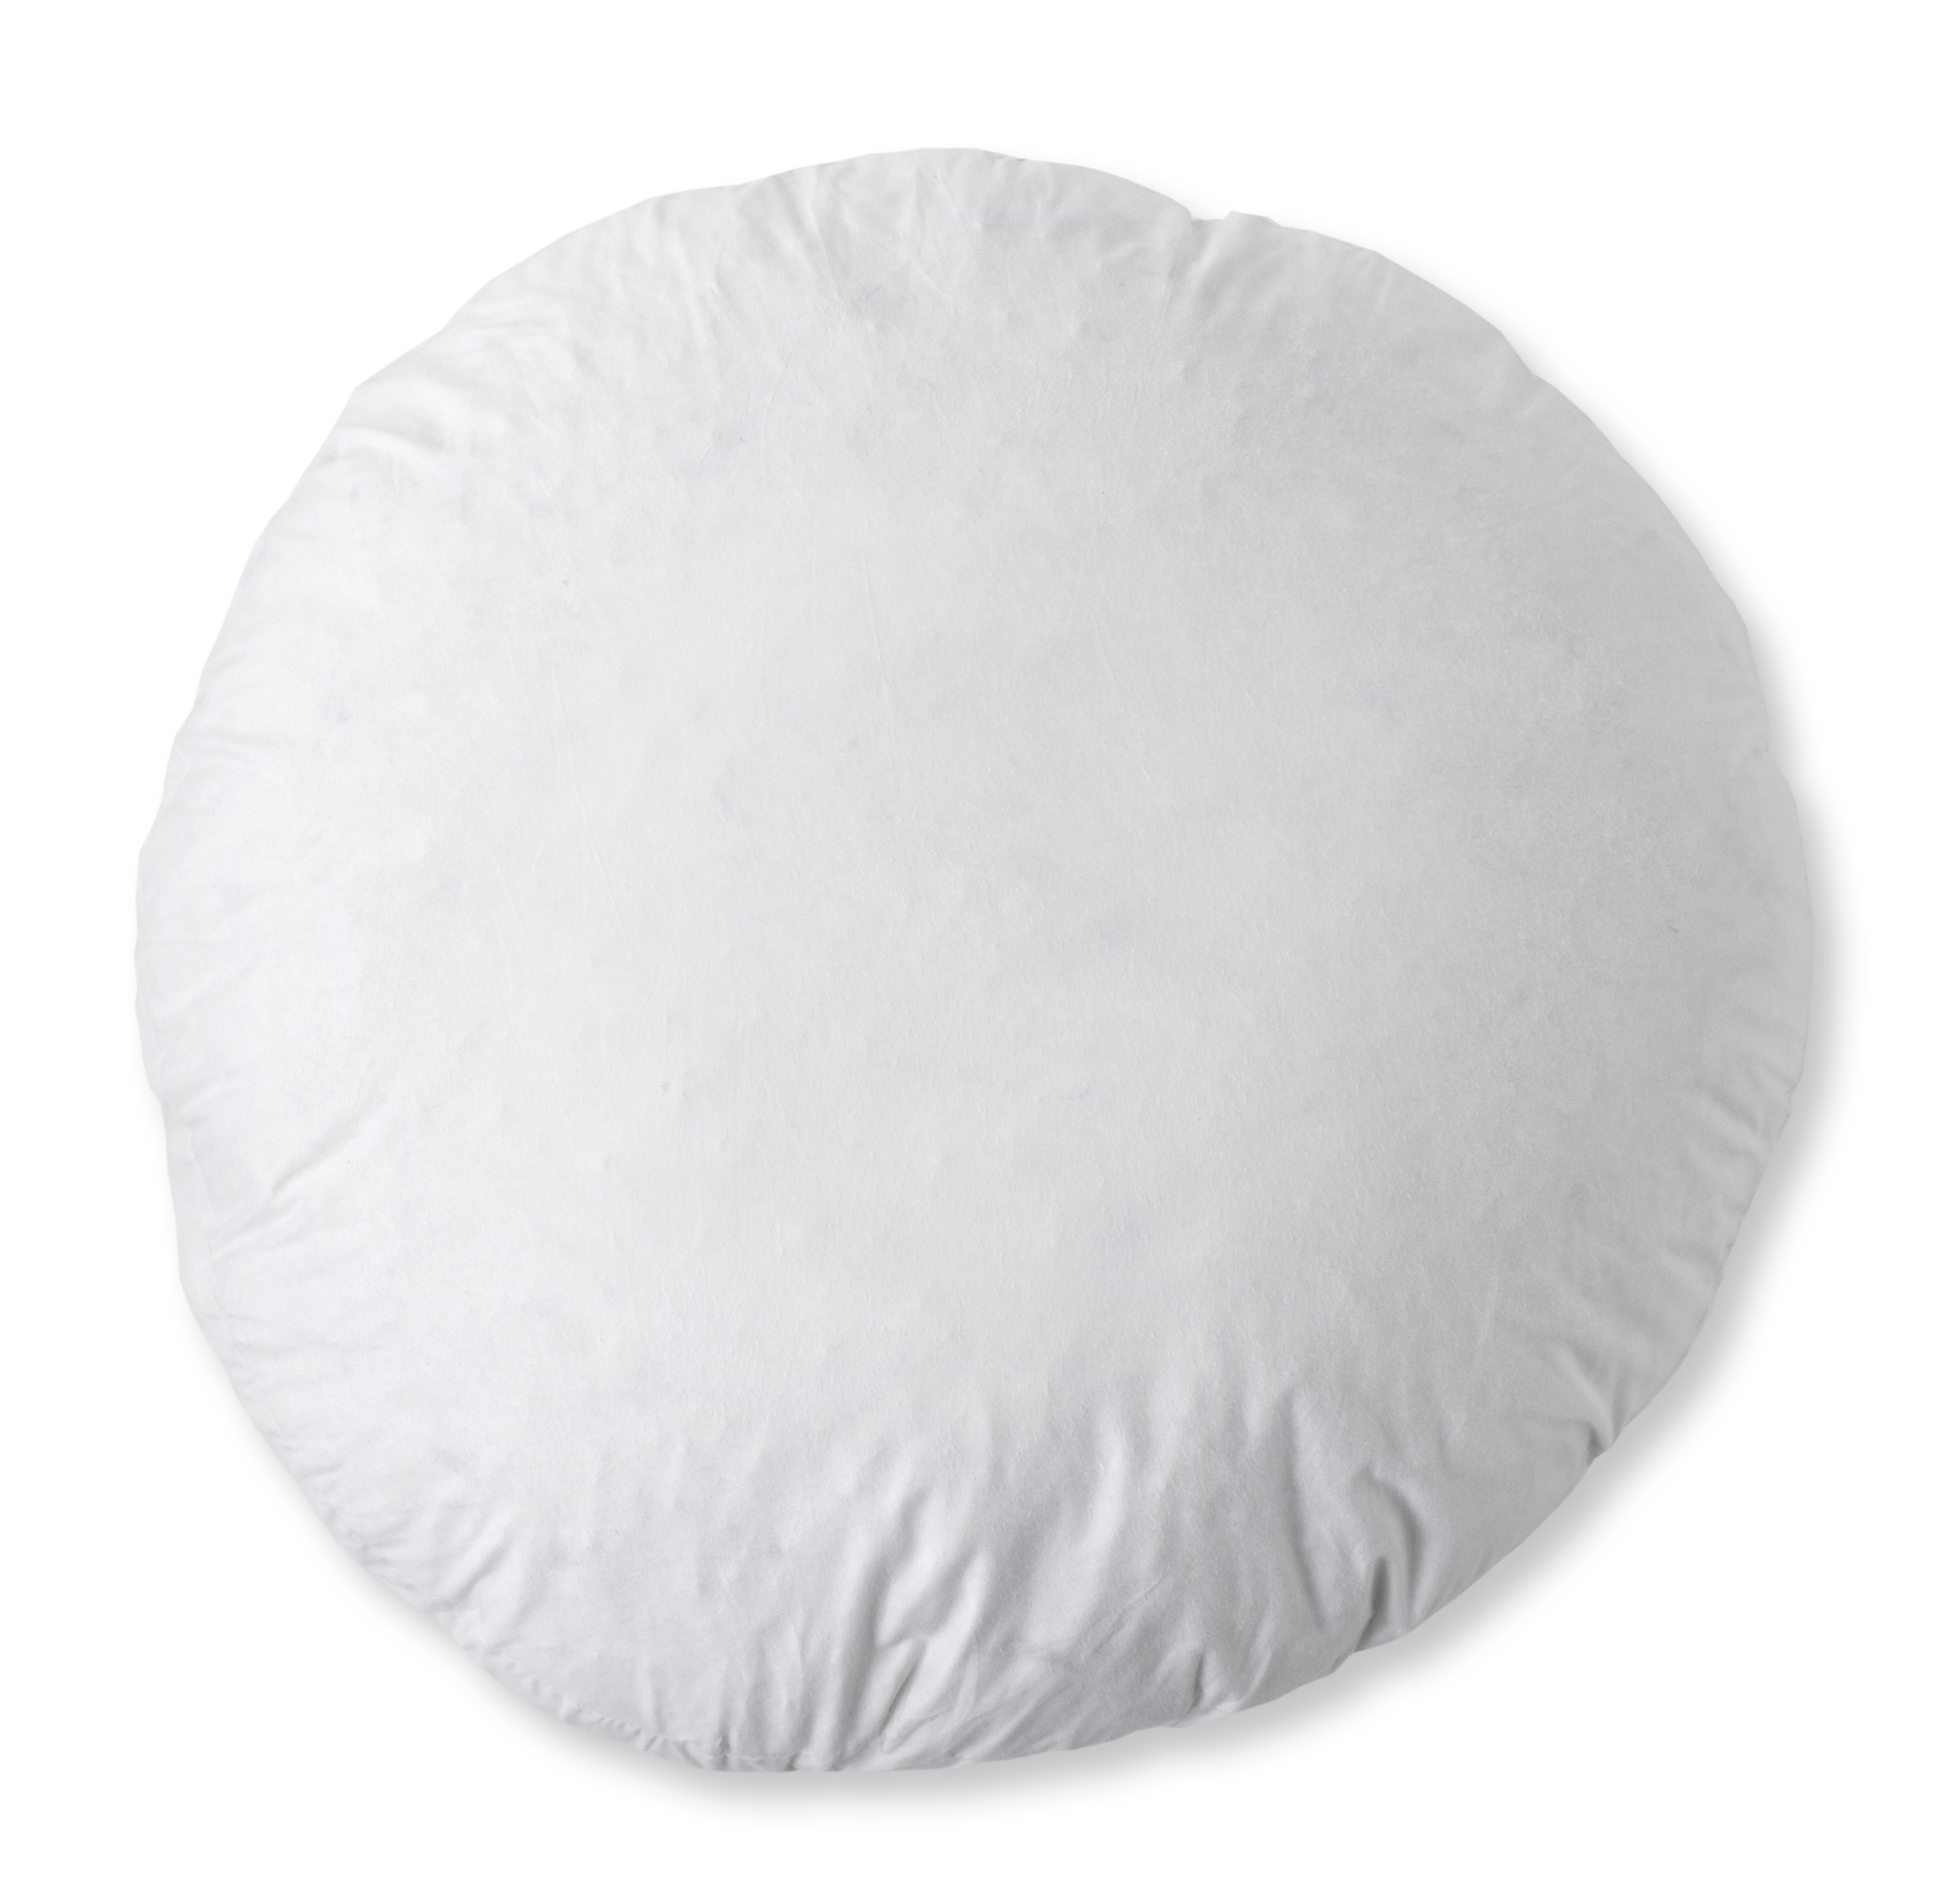 Pillow Insert 95/5 Feather/Down 16" Round